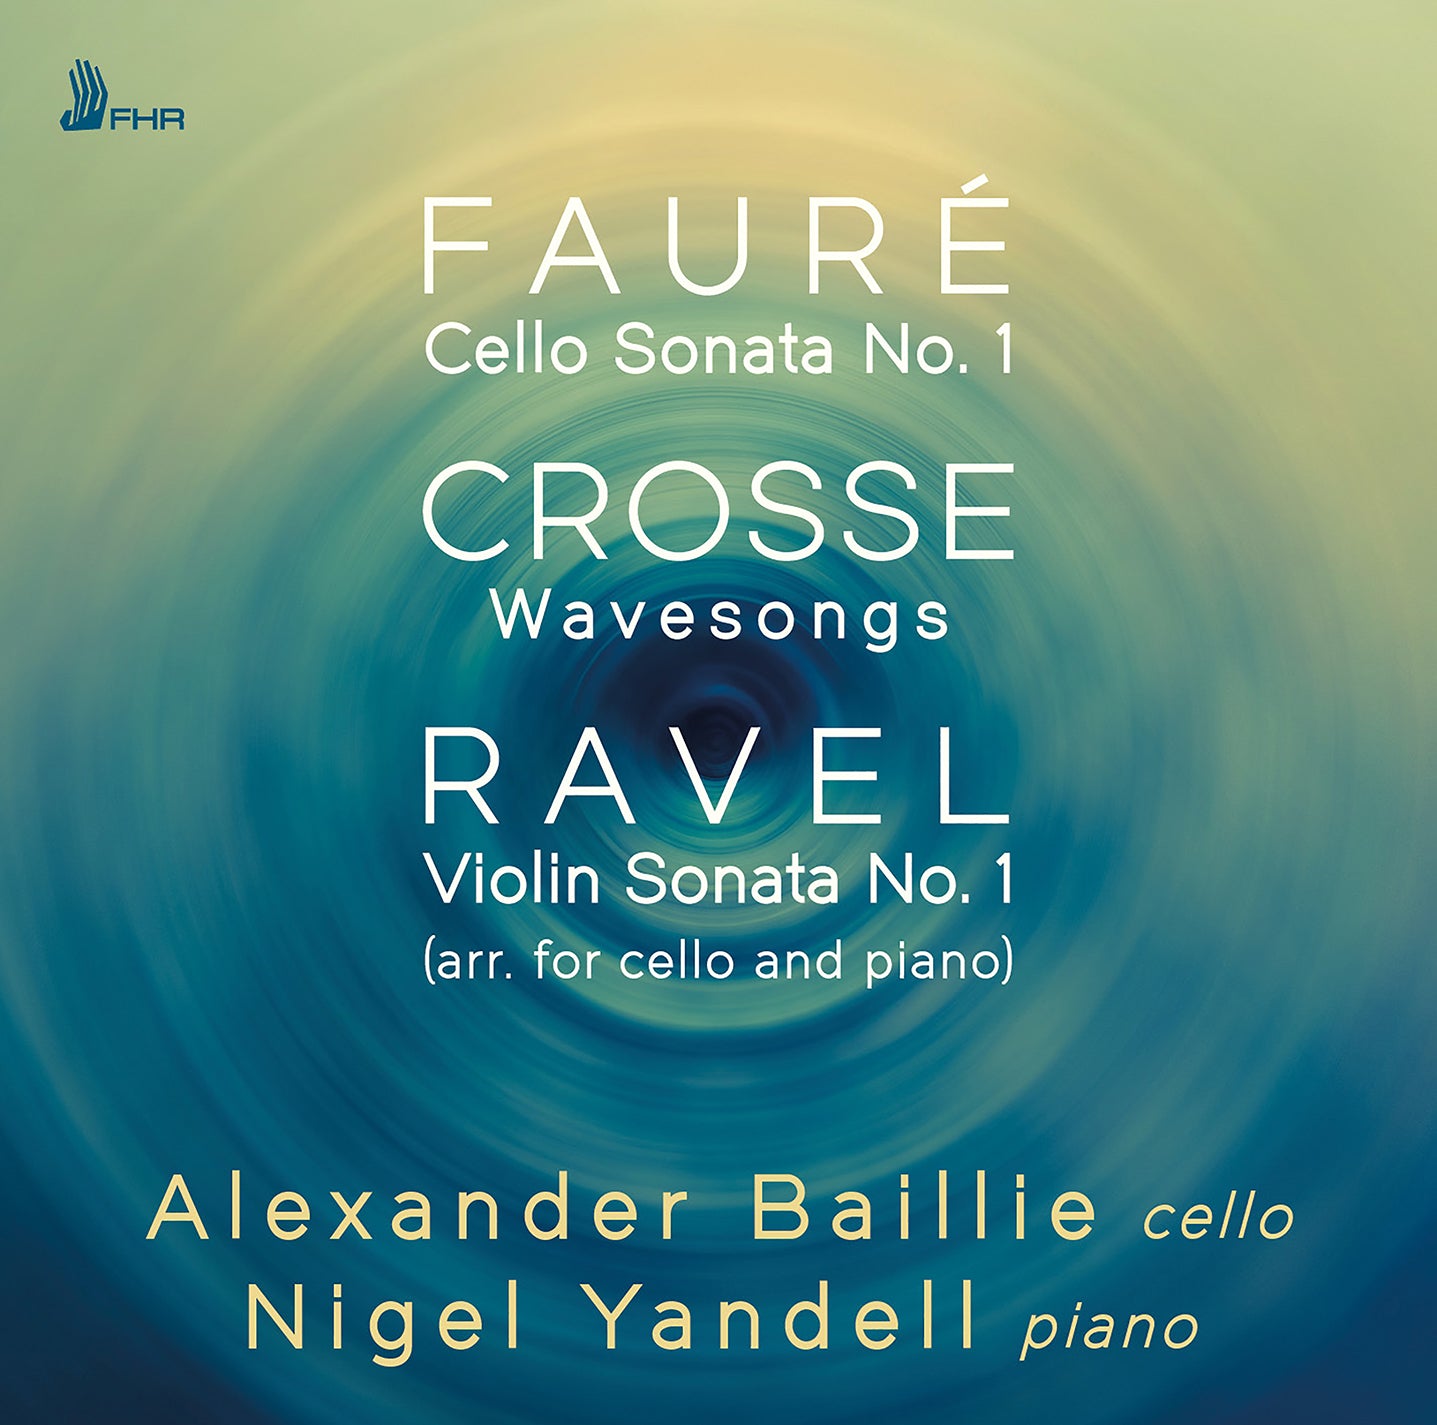 Fauré, Crosse & Ravel: Works for Cello & Piano / Baillie, Yandell